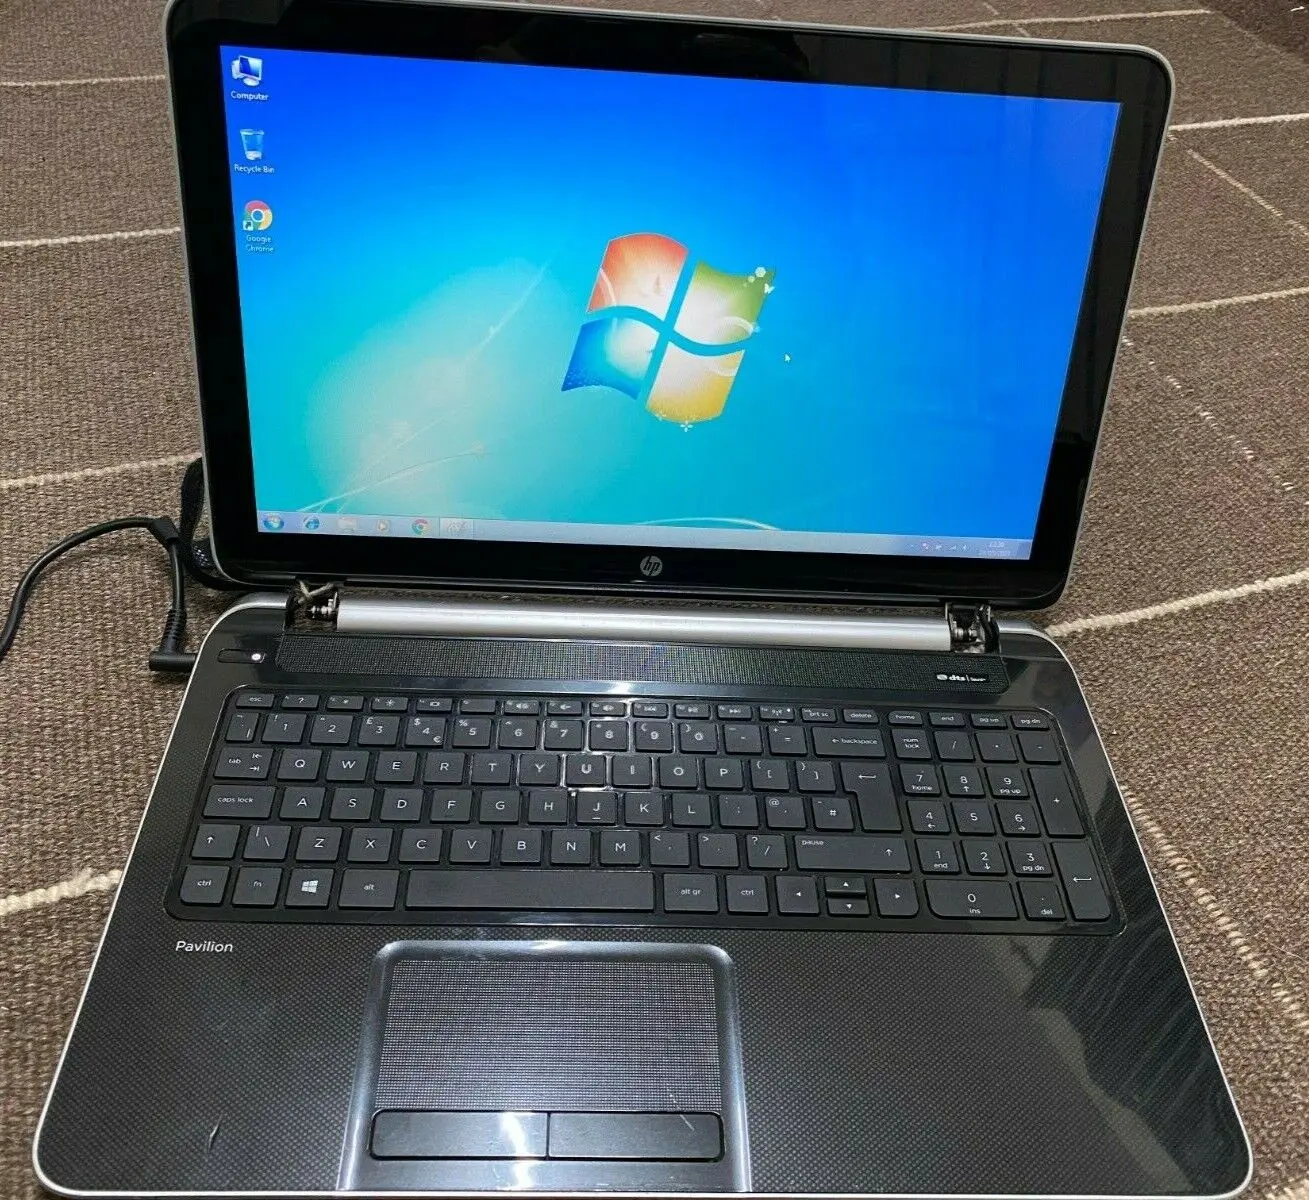 hewlett packard hp pavilion ts 15 notebook pc - What is the screen size of system model HP Pavilion 15 NoteBook PC